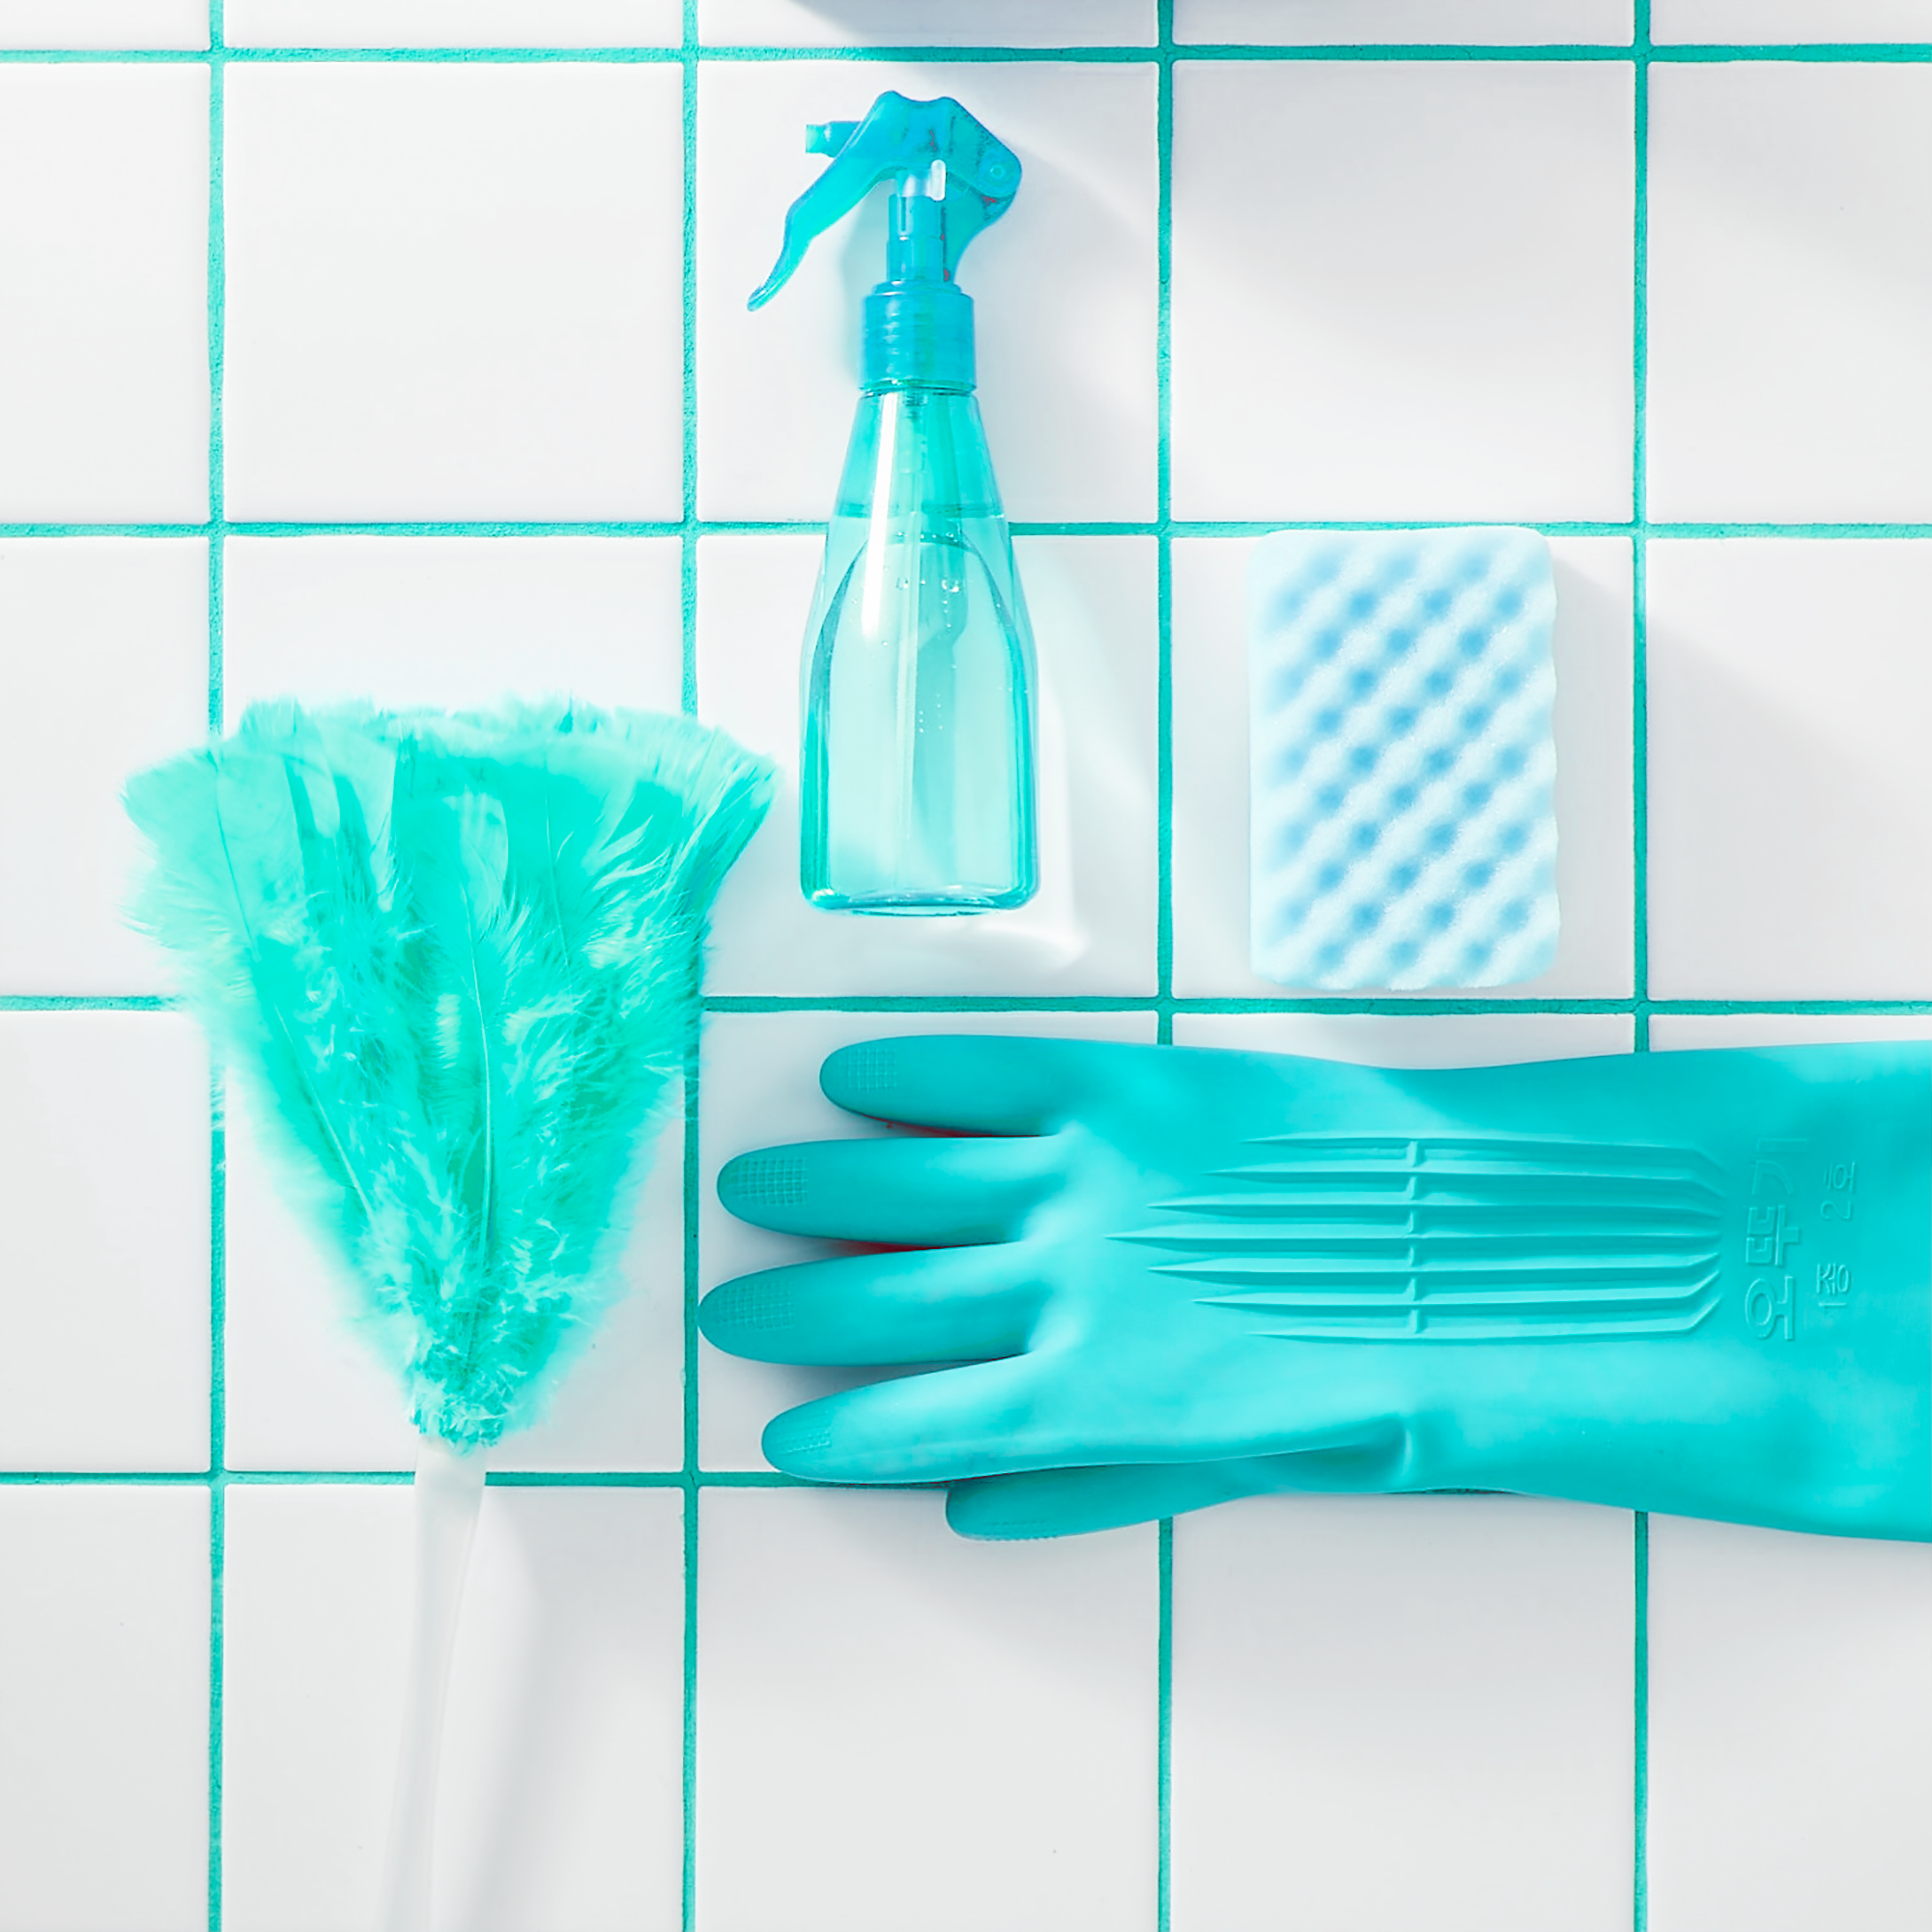 Three Household Items That Disinfect Plus Using Them Properly